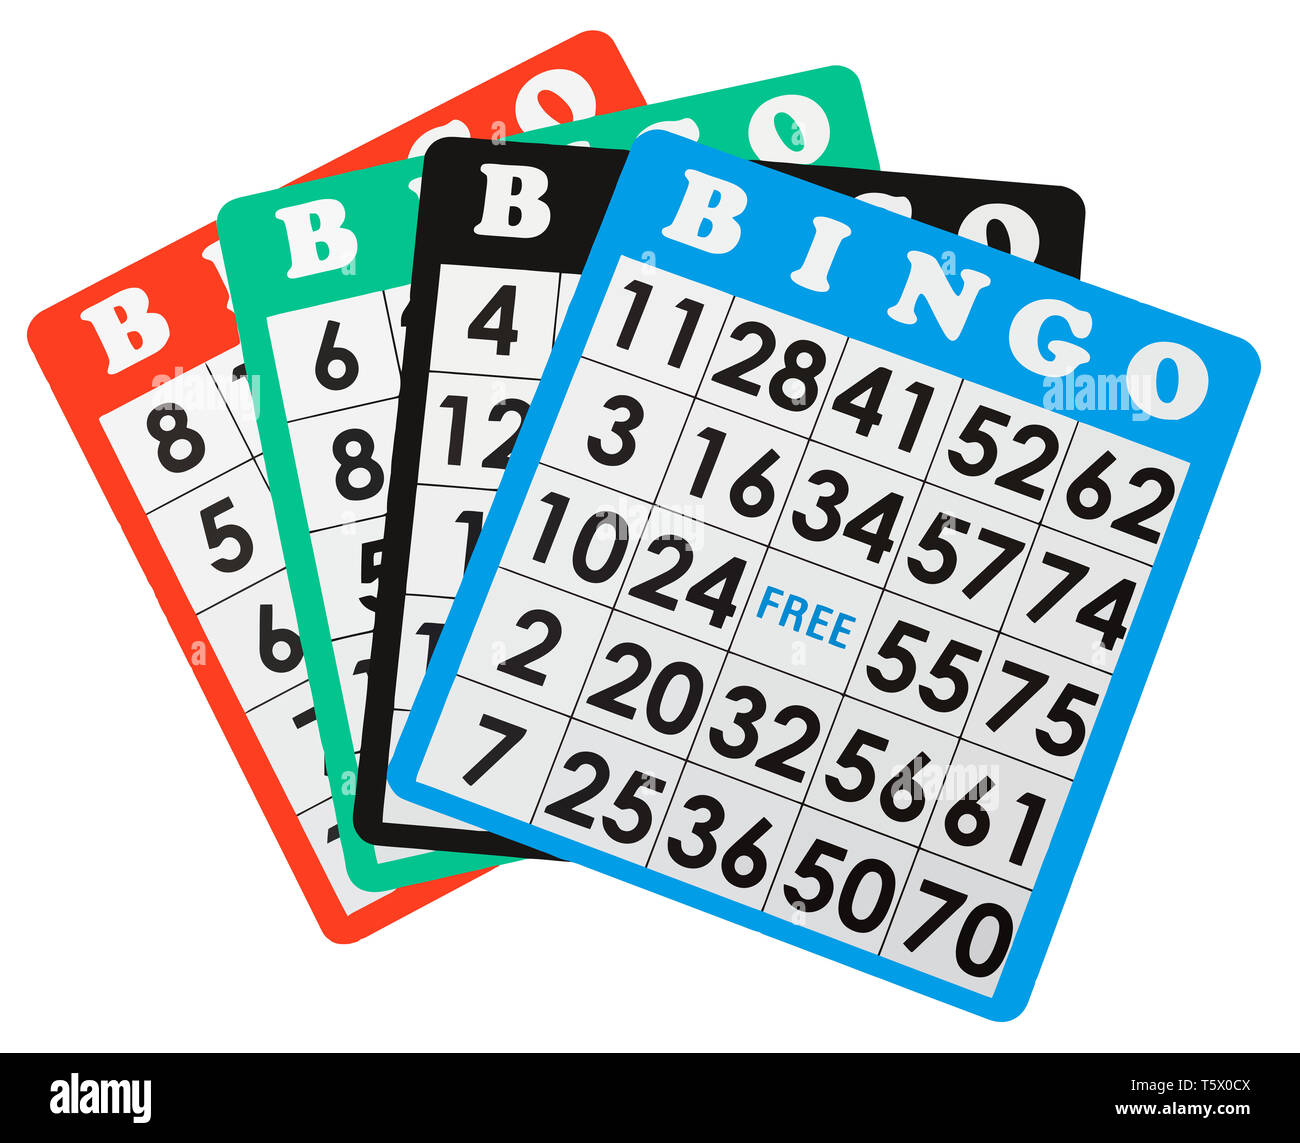 Picture of 4 bingo cards